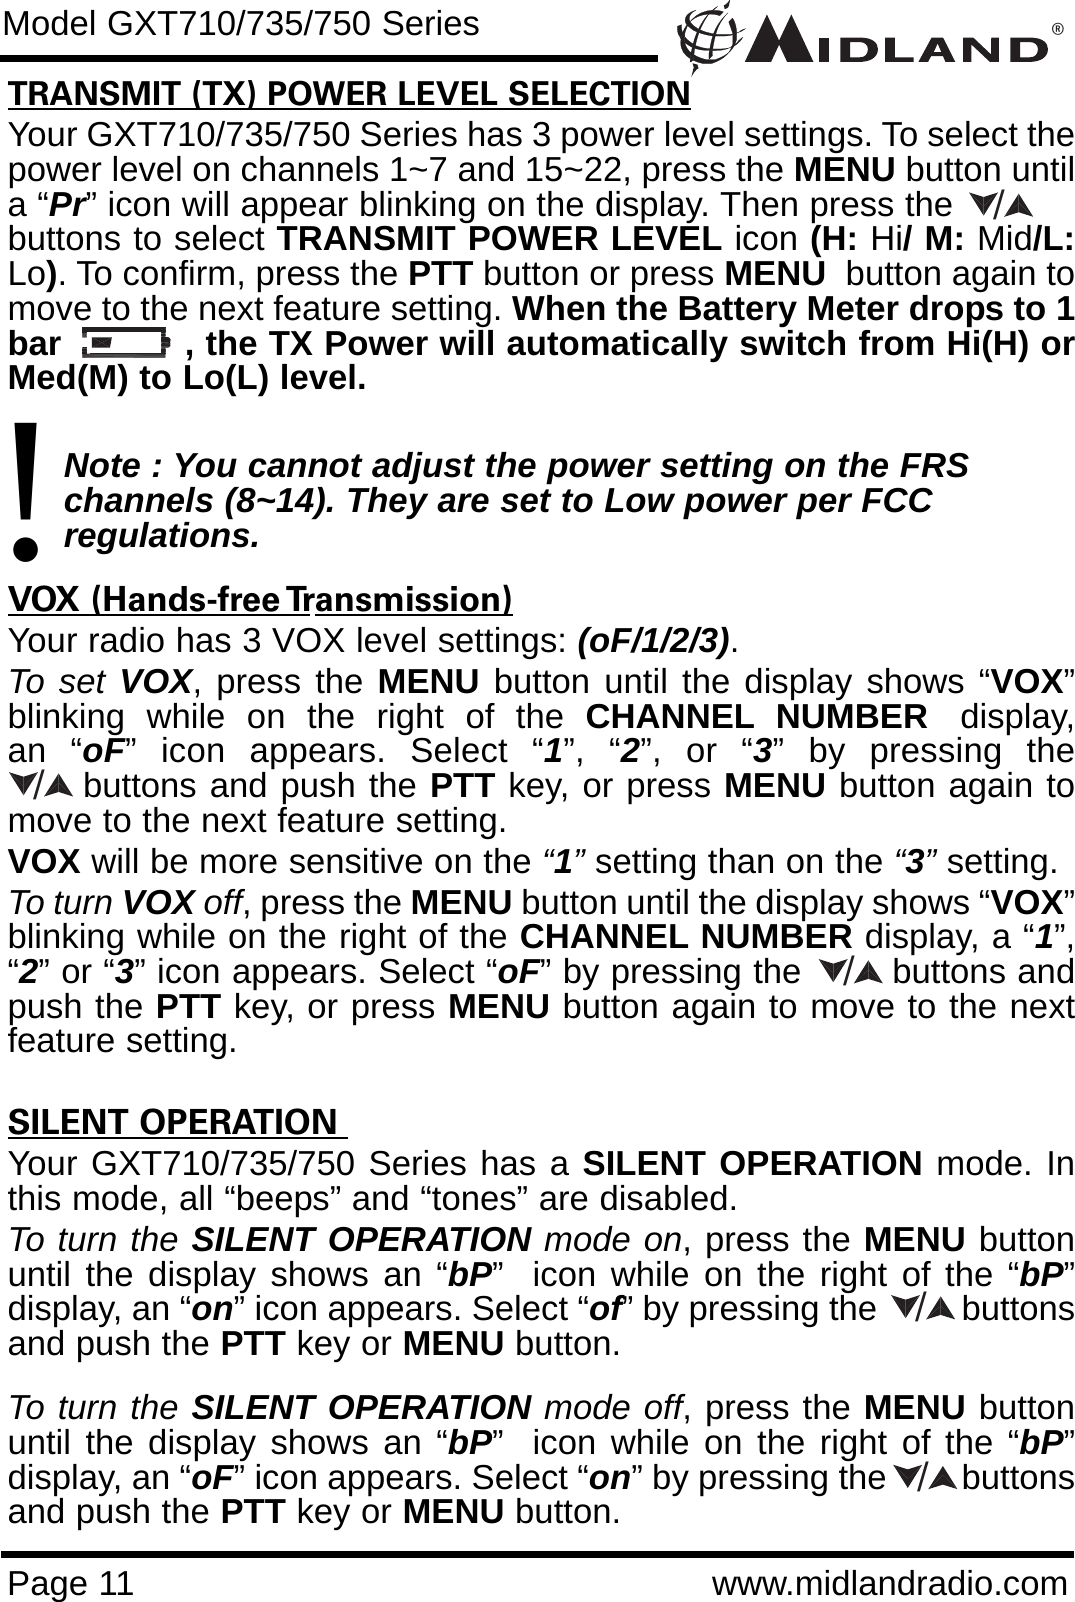 ®Page 11 www.midlandradio.comTRANSMIT (TX) POWER LEVEL SELECTIONYour GXT710/735/750 Series has 3 power level settings. To select thepower level on channels 1~7 and 15~22, press the MENU button untila “Pr” icon will appear blinking on the display. Then press the           buttons to select TRANSMIT POWER LEVEL icon (H: Hi/ M: Mid/L:Lo). To confirm, press the PTT button or press MENU button again tomove to the next feature setting. When the Battery Meter drops to 1bar           , the TX Power will automatically switch from Hi(H) orMed(M) to Lo(L) level.Note : You cannot adjust the power setting on the FRS   channels (8~14). They are set to Low power per FCC          regulations.VOX (Hands-free Transmission)Your radio has 3 VOX level settings: (oF/1/2/3).To set VOX, press the MENU button until the display shows “VOX”blinking  while  on  the  right  of  the  CHANNEL NUMBER display,an “oF” icon appears. Select “1”, “2”, or “3” by pressing thebuttons and push the PTT key, or press MENU button again tomove to the next feature setting.  VOX will be more sensitive on the “1”setting than on the “3”setting.To turn VOX off, press the MENU button until the display shows “VOX”blinking while on the right of the CHANNEL NUMBER display, a “1”,“2” or “3” icon appears. Select “oF” by pressing the        buttons andpush the PTT key, or press MENU button again to move to the nextfeature setting.SILENT OPERATION Your GXT710/735/750 Series has a SILENT OPERATION mode. Inthis mode, all “beeps” and “tones” are disabled. To turn the SILENT OPERATION mode on, press the MENU buttonuntil the display shows an “bP”  icon while on the right of the “bP”display, an “on” icon appears. Select “of” by pressing the         buttonsand push the PTT key or MENU button. To turn the SILENT OPERATION mode off, press the MENU buttonuntil the display shows an “bP”  icon while on the right of the “bP”display, an “oF” icon appears. Select “on” by pressing the        buttonsand push the PTT key or MENU button.Model GXT710/735/750 Series!/////